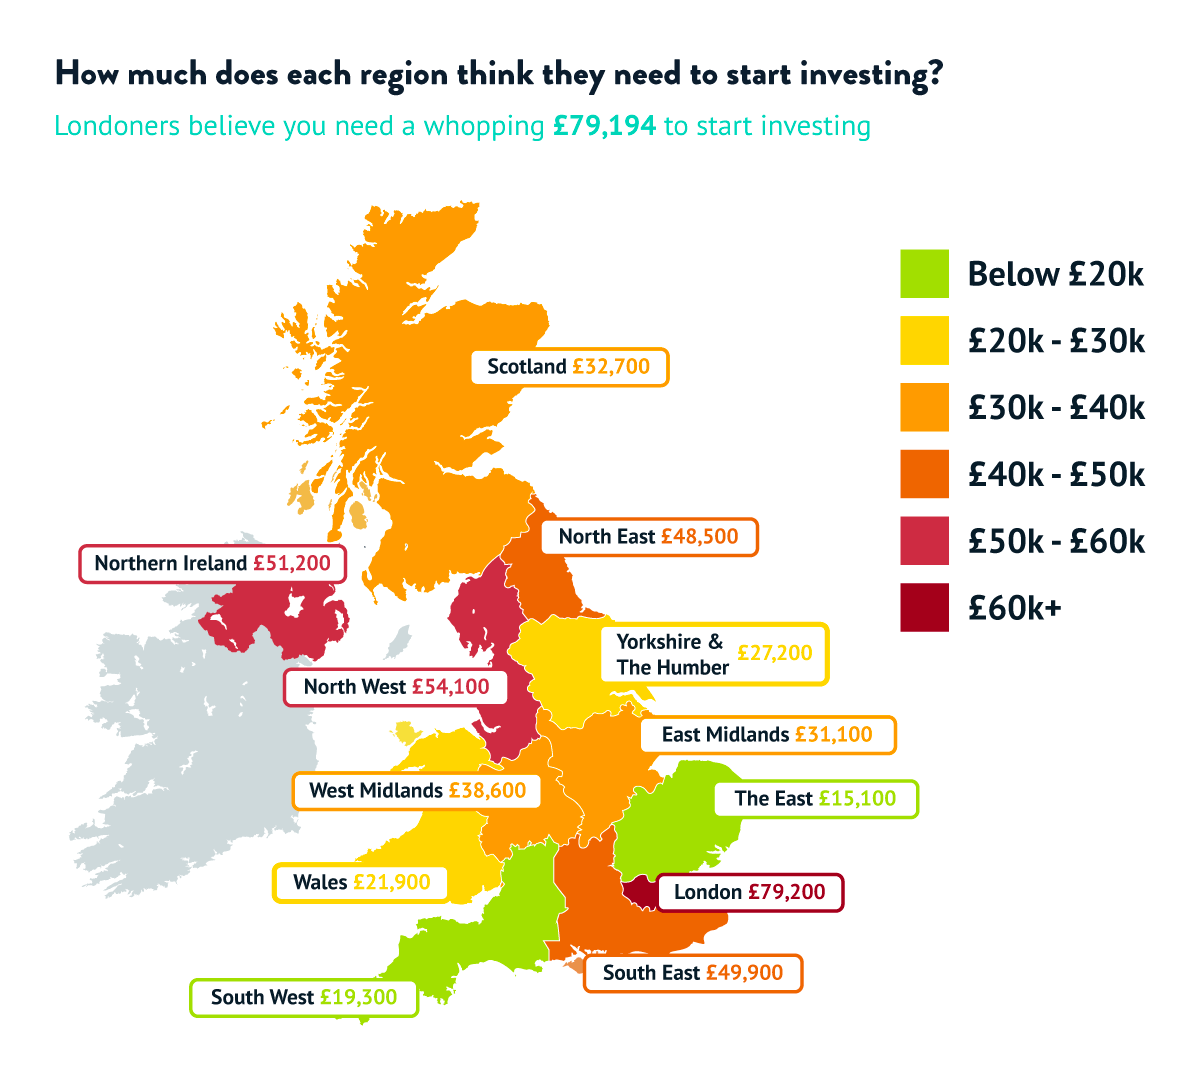 Infographic showing a map of UK and how much each region thinks they need to start investing. With Scotland saying £32,700, Wales £21,900, Northern Ireland £51,200 and London £79,200